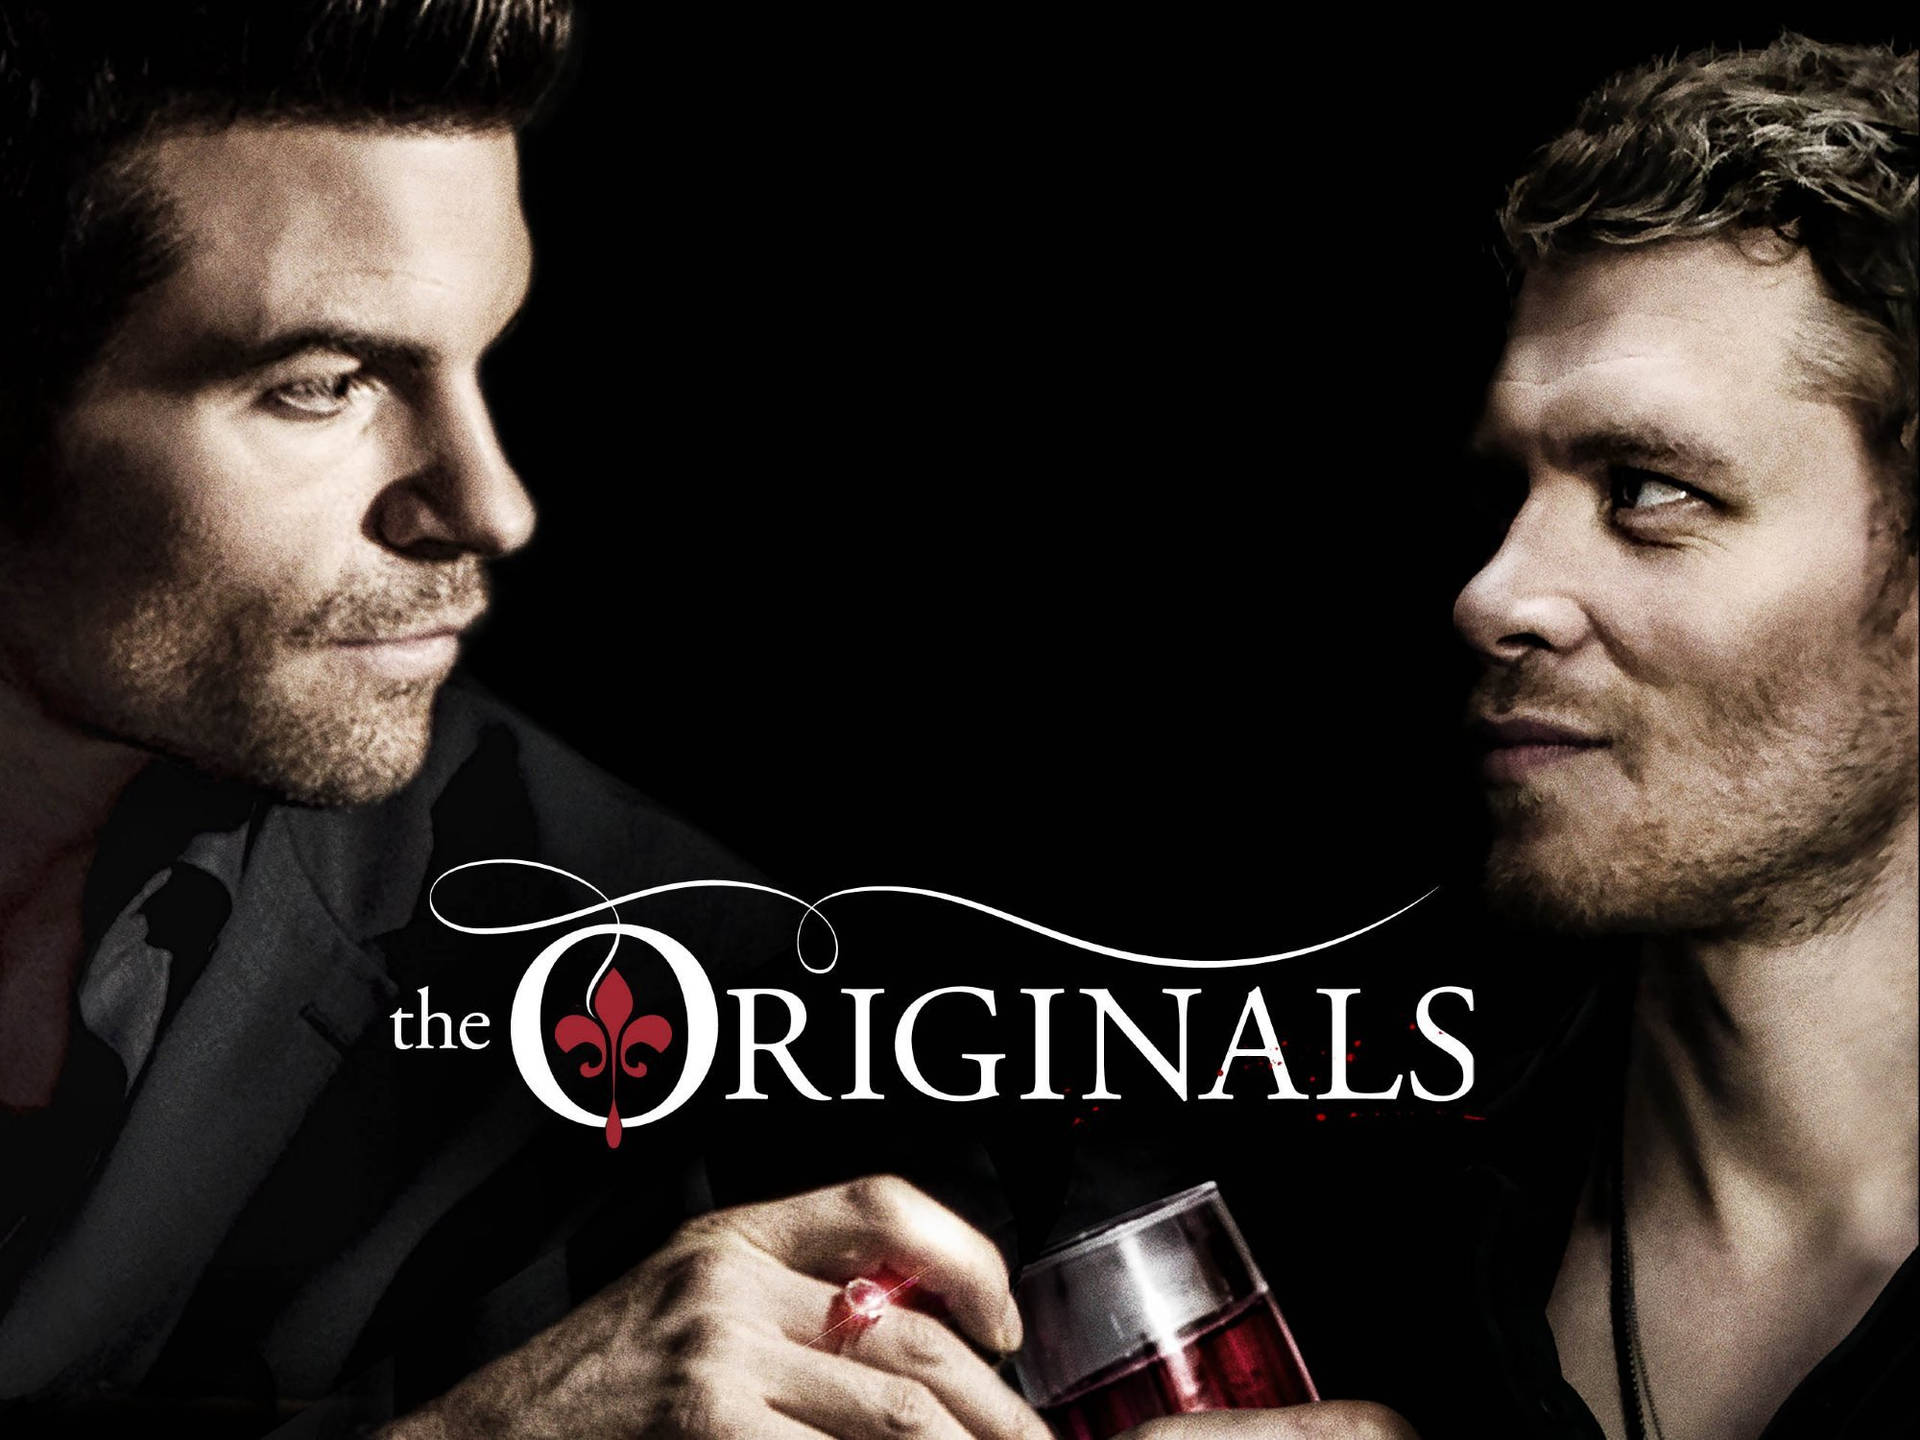 The Originals Mikaelson Brothers Cover Background